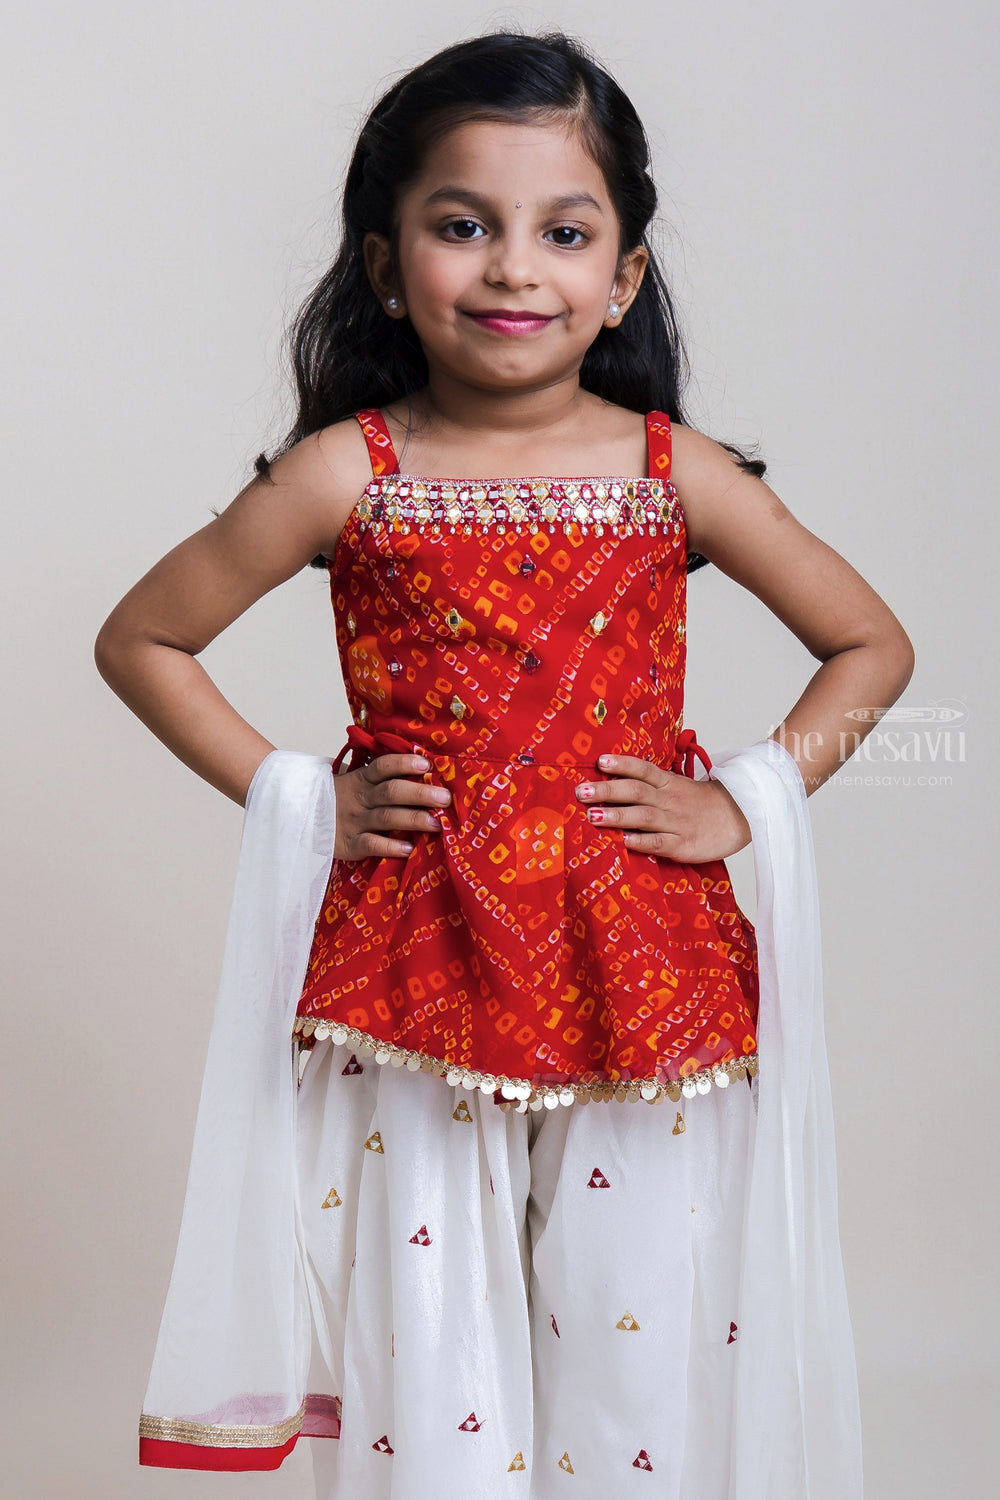 The Nesavu Girls Dothi Sets Maroon Short Tops With Mirror Embroidered Patiala Pants For Girls Nesavu Ethnic Short Tops And Patiala Pants| New Collection| The Nesavu